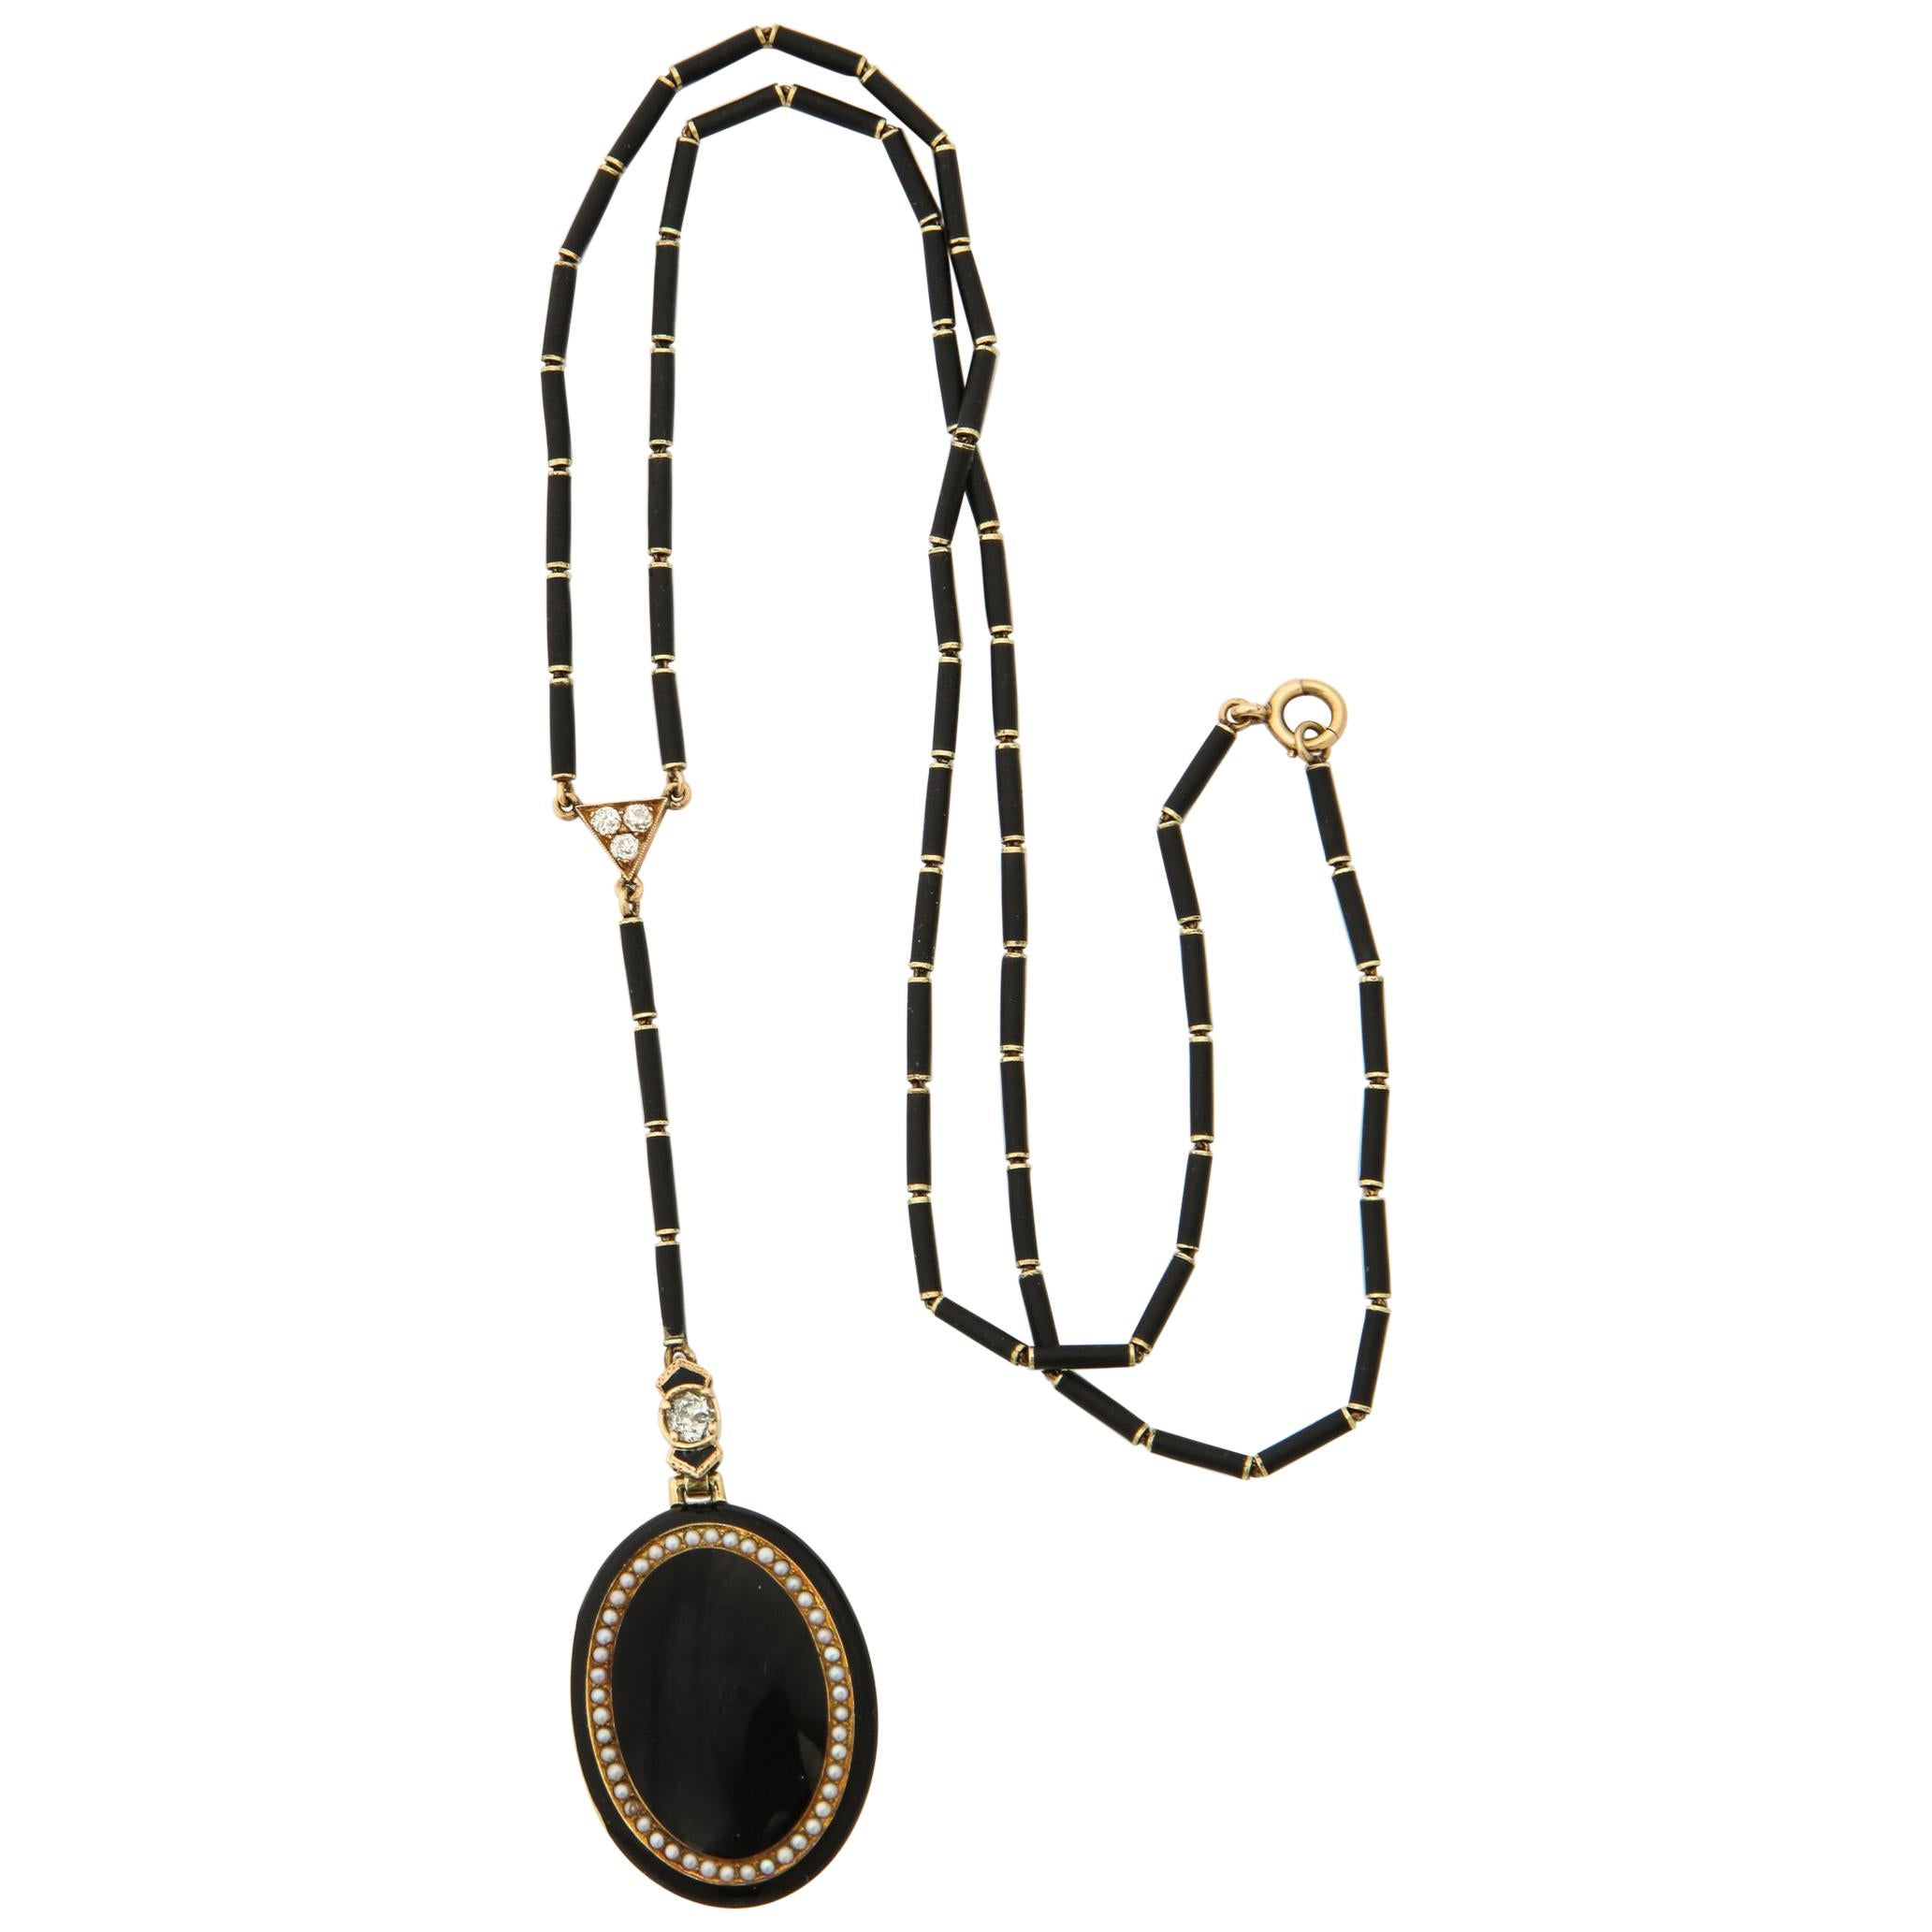 1920s Art Deco Black Enamel with Seed Pearls and Diamonds Gold Locket Necklace